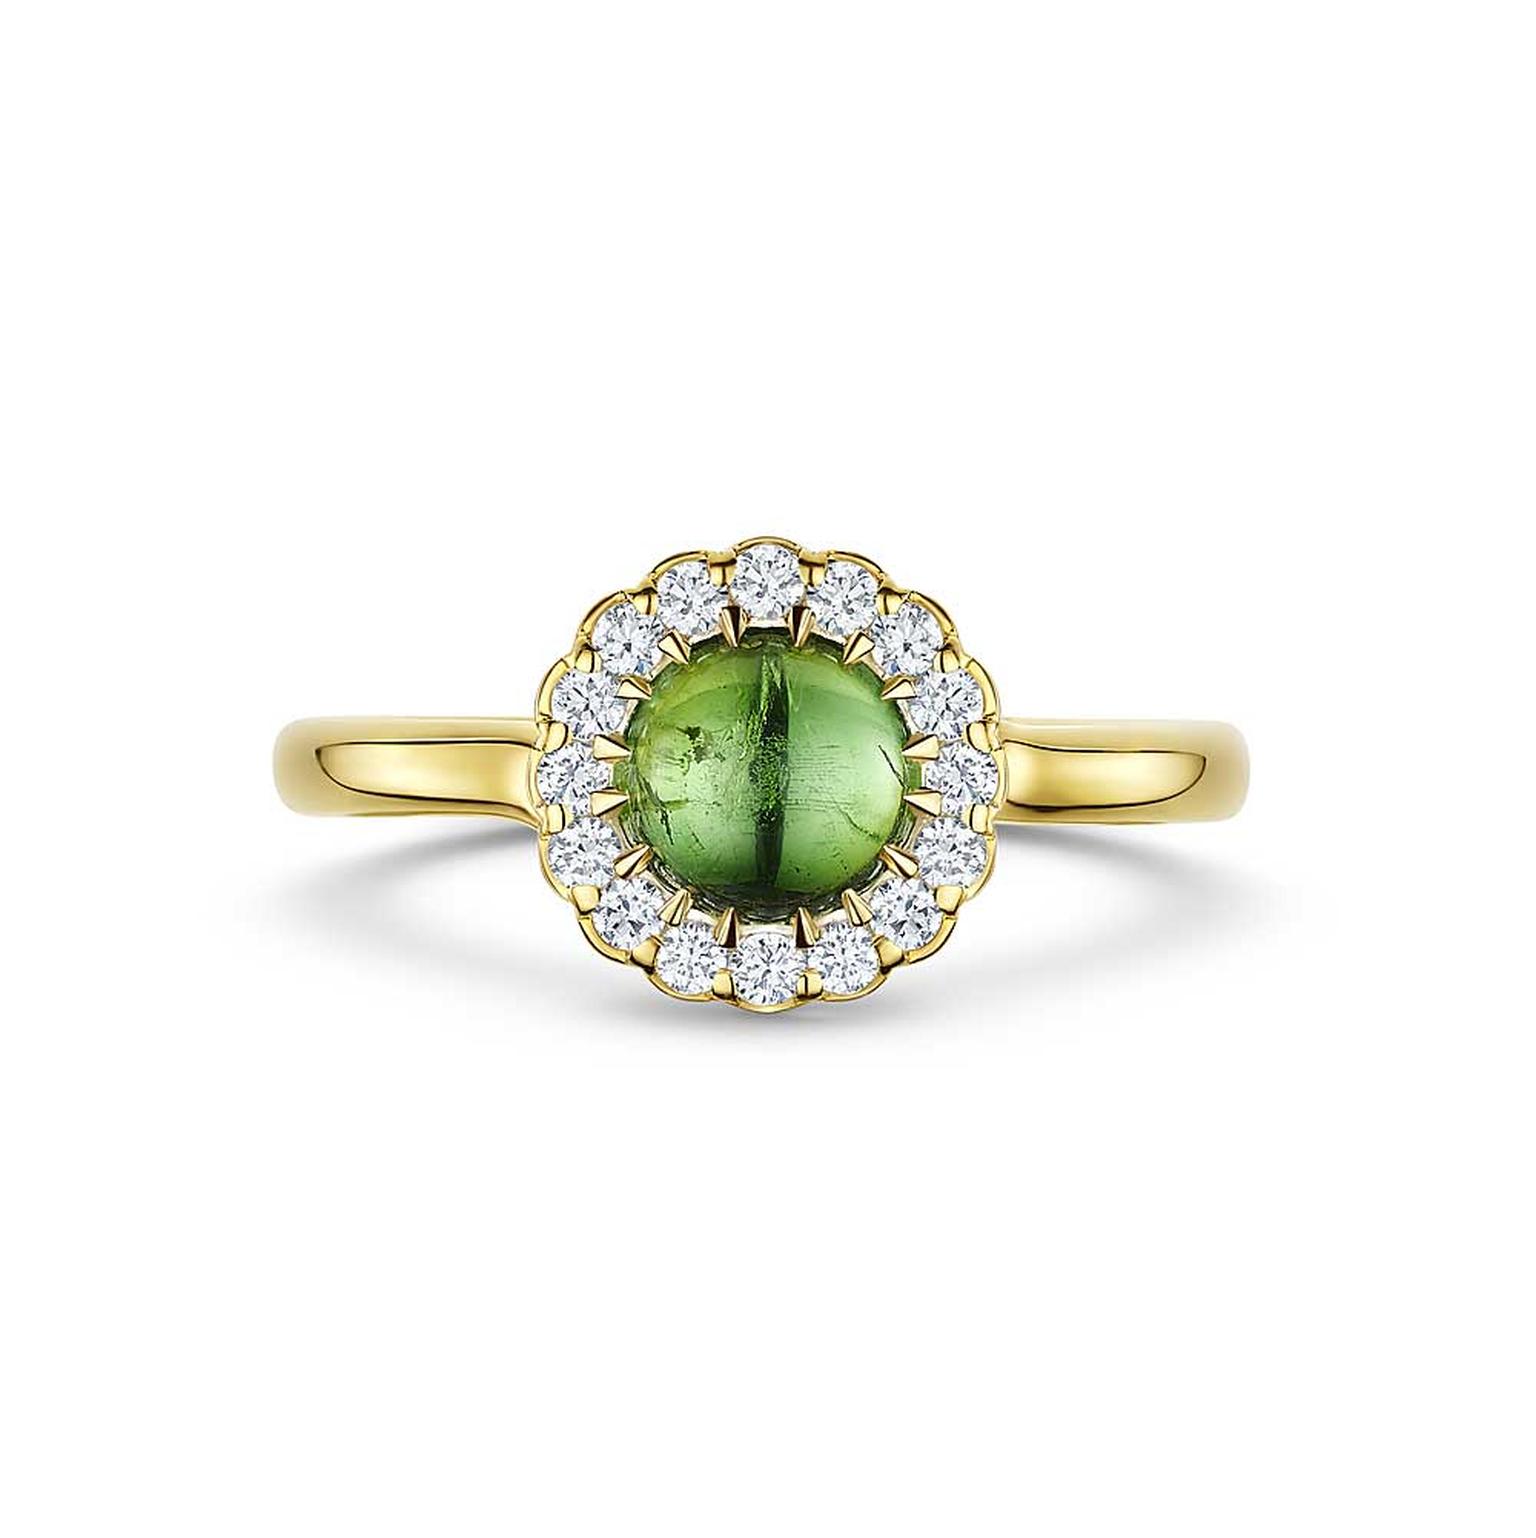 Andrew Geoghegan Cannele Twist cabochon tourmaline ring in 18ct yellow gold with diamonds